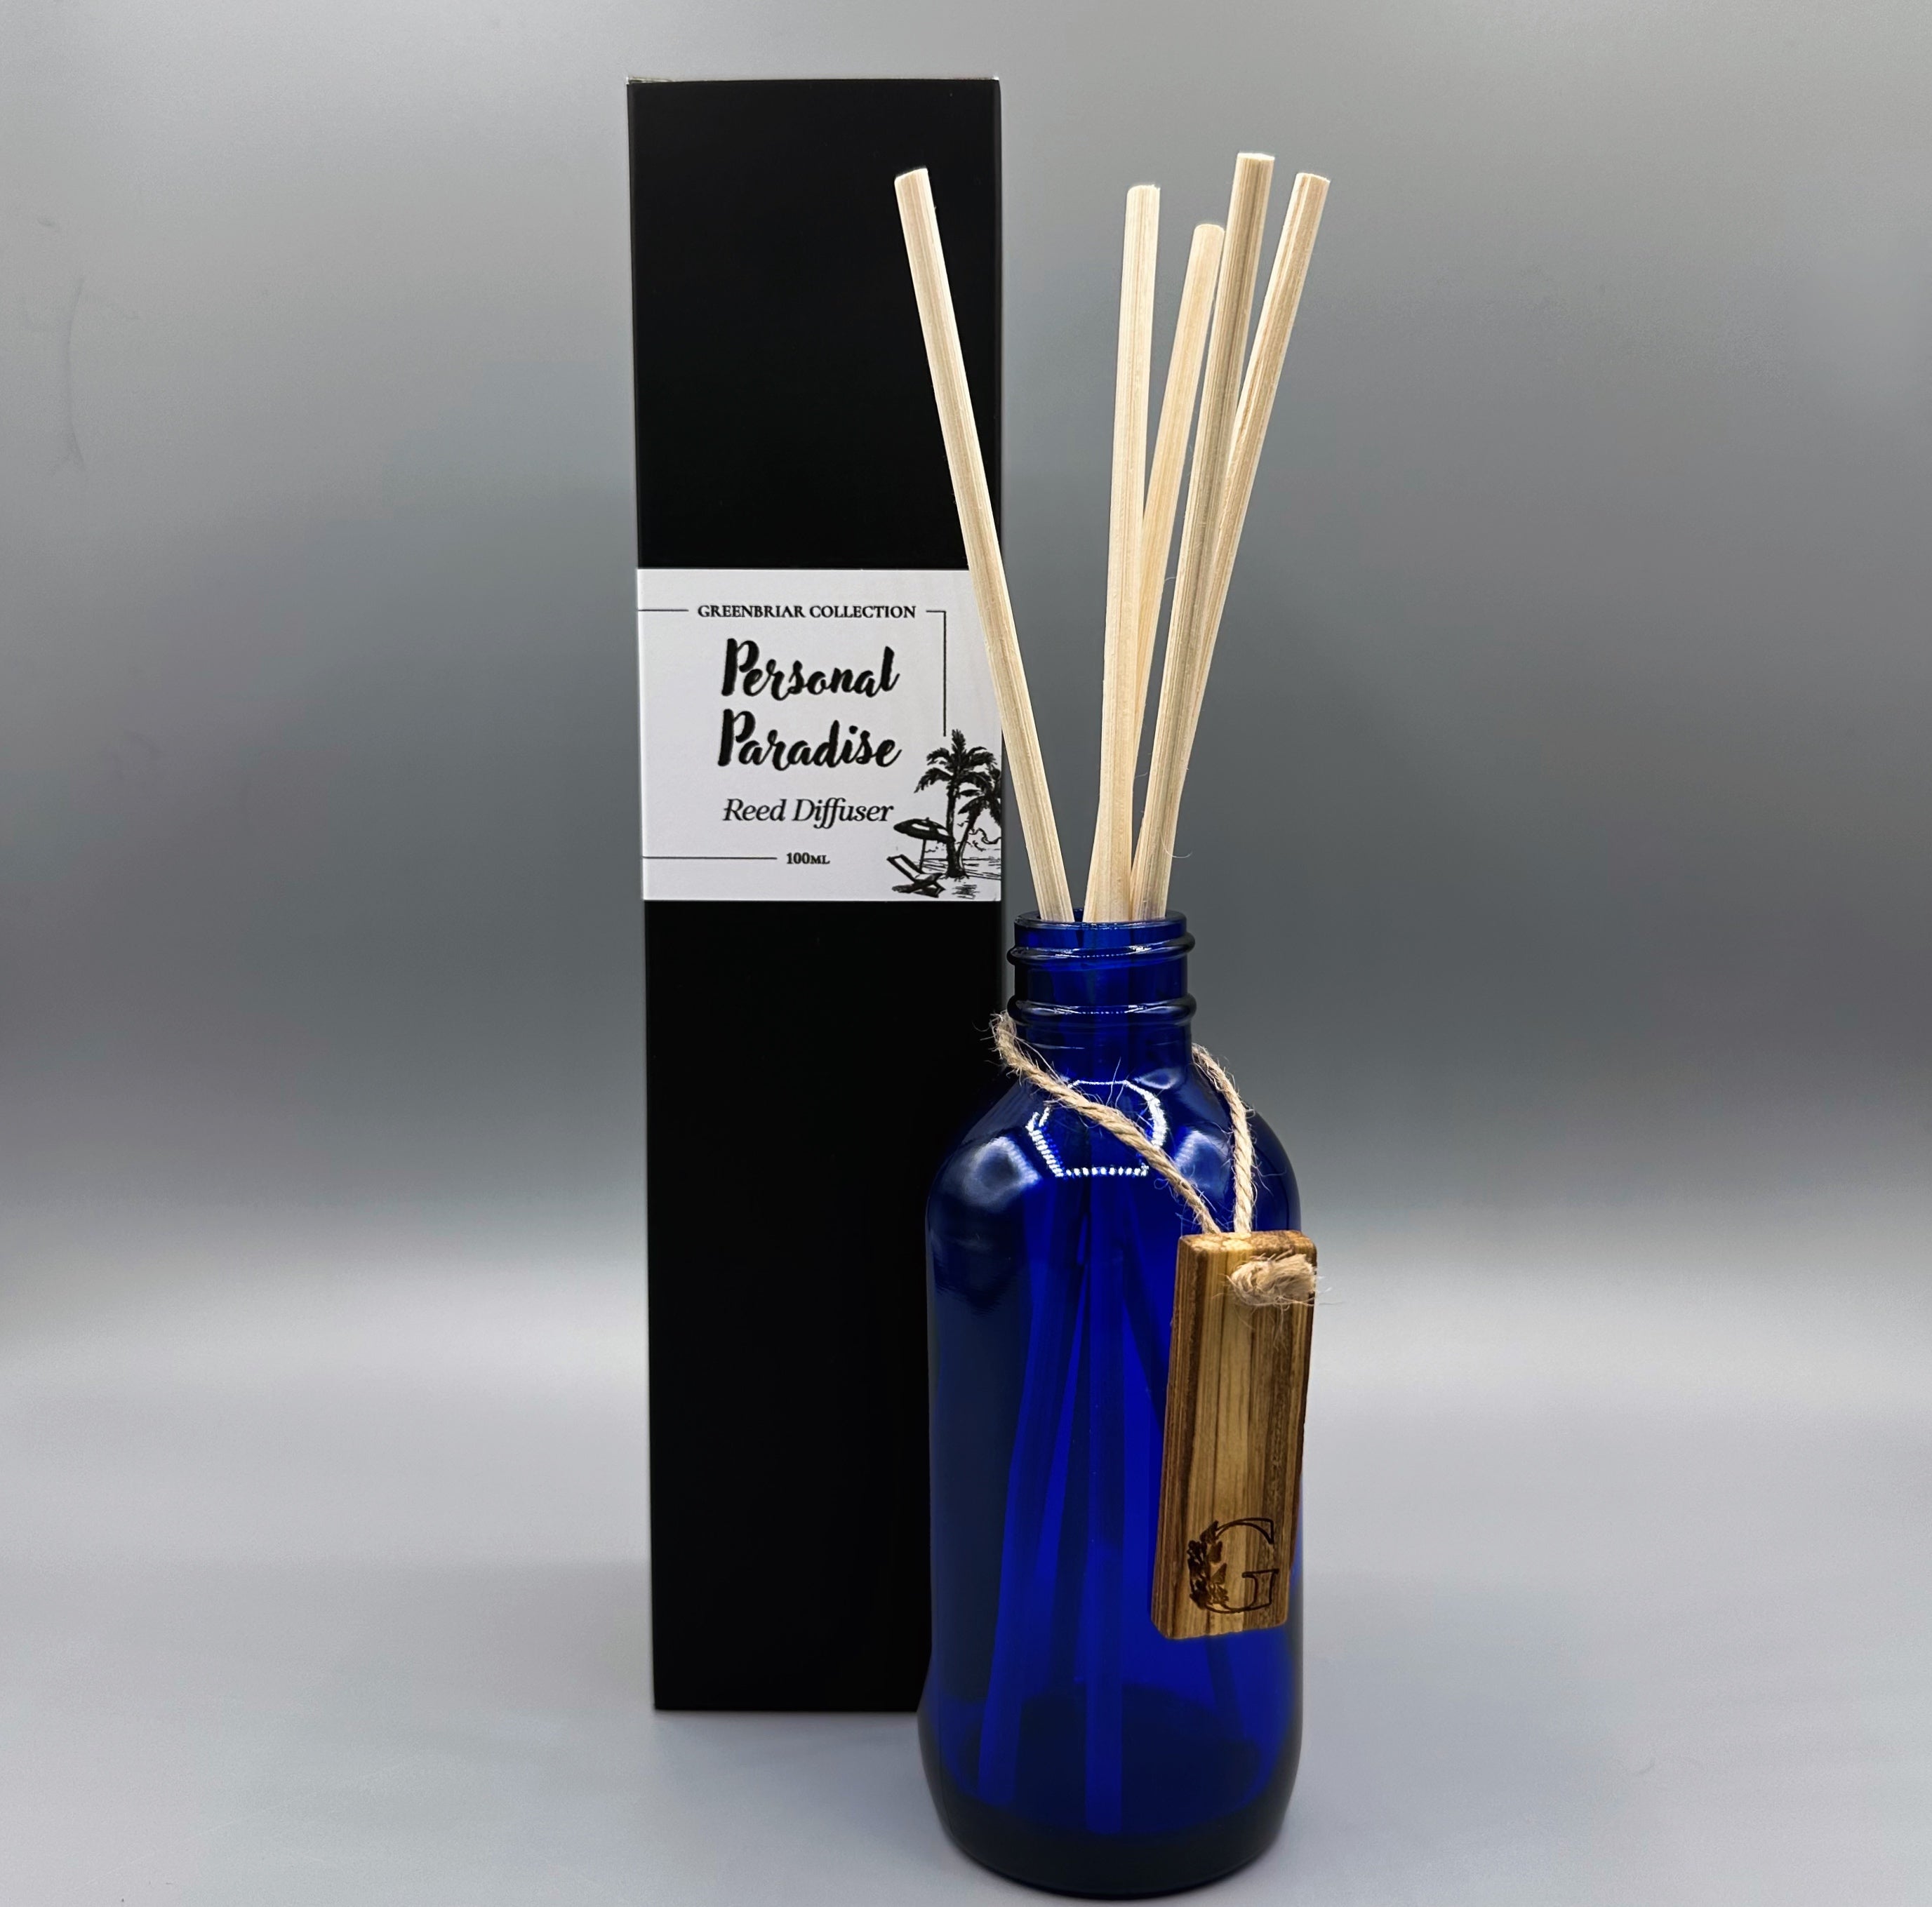 Reed Diffuser | Personal Paradise